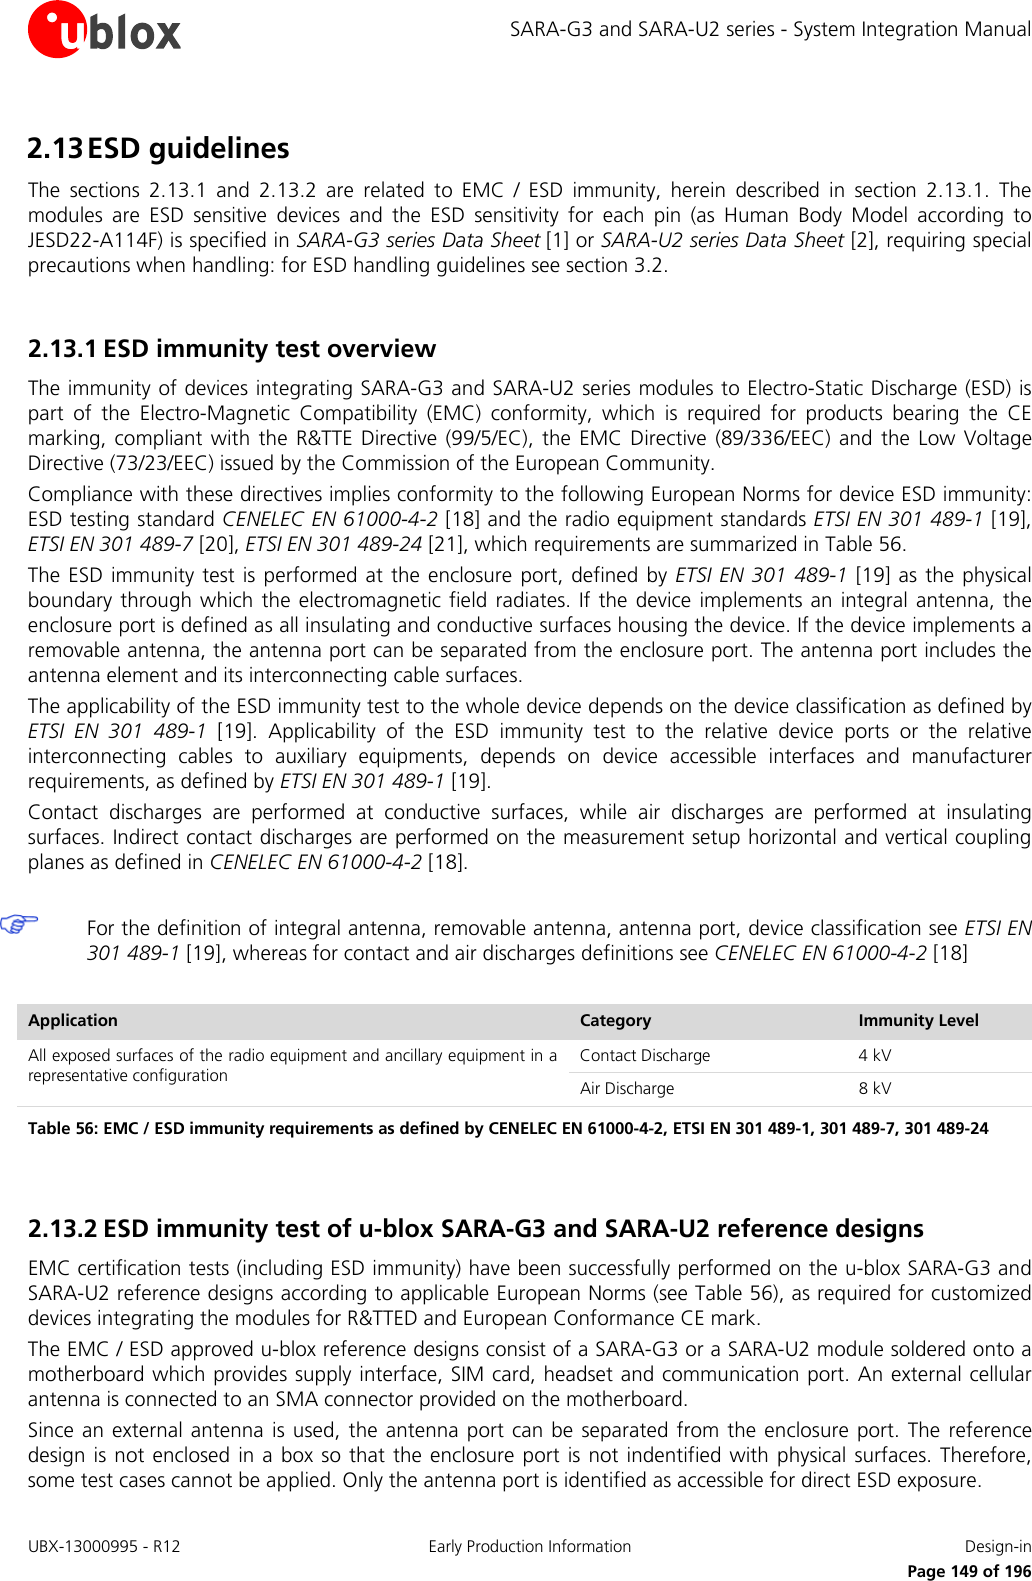 SARA-G3 and SARA-U2 series - System Integration Manual 2.13 ESD guidelines The sections 2.13.1 and  2.13.2 are related to  EMC / ESD immunity,  herein described in section 2.13.1. The modules are ESD sensitive devices and the ESD sensitivity for each pin (as Human Body Model according to JESD22-A114F) is specified in SARA-G3 series Data Sheet [1] or SARA-U2 series Data Sheet [2], requiring special precautions when handling: for ESD handling guidelines see section 3.2.  2.13.1 ESD immunity test overview The immunity of devices integrating SARA-G3 and SARA-U2 series modules to Electro-Static Discharge (ESD) is part of the Electro-Magnetic Compatibility (EMC) conformity,  which is required for products bearing the CE marking, compliant with the R&amp;TTE Directive (99/5/EC), the EMC Directive (89/336/EEC) and the Low Voltage Directive (73/23/EEC) issued by the Commission of the European Community. Compliance with these directives implies conformity to the following European Norms for device ESD immunity: ESD testing standard CENELEC EN 61000-4-2 [18] and the radio equipment standards ETSI EN 301 489-1 [19], ETSI EN 301 489-7 [20], ETSI EN 301 489-24 [21], which requirements are summarized in Table 56. The ESD immunity test is performed at the enclosure port, defined by ETSI EN 301 489-1 [19] as the physical boundary through which the electromagnetic field radiates. If the device implements an integral antenna, the enclosure port is defined as all insulating and conductive surfaces housing the device. If the device implements a removable antenna, the antenna port can be separated from the enclosure port. The antenna port includes the antenna element and its interconnecting cable surfaces. The applicability of the ESD immunity test to the whole device depends on the device classification as defined by ETSI EN 301 489-1  [19]. Applicability of the  ESD immunity test to the relative device ports or the relative interconnecting cables to auxiliary equipments, depends on device accessible interfaces and manufacturer requirements, as defined by ETSI EN 301 489-1 [19]. Contact discharges are performed at conductive surfaces, while air discharges are performed at insulating surfaces. Indirect contact discharges are performed on the measurement setup horizontal and vertical coupling planes as defined in CENELEC EN 61000-4-2 [18].   For the definition of integral antenna, removable antenna, antenna port, device classification see ETSI EN 301 489-1 [19], whereas for contact and air discharges definitions see CENELEC EN 61000-4-2 [18]  Application Category Immunity Level All exposed surfaces of the radio equipment and ancillary equipment in a representative configuration Contact Discharge 4 kV Air Discharge 8 kV Table 56: EMC / ESD immunity requirements as defined by CENELEC EN 61000-4-2, ETSI EN 301 489-1, 301 489-7, 301 489-24   2.13.2 ESD immunity test of u-blox SARA-G3 and SARA-U2 reference designs EMC certification tests (including ESD immunity) have been successfully performed on the u-blox SARA-G3 and SARA-U2 reference designs according to applicable European Norms (see Table 56), as required for customized devices integrating the modules for R&amp;TTED and European Conformance CE mark. The EMC / ESD approved u-blox reference designs consist of a SARA-G3 or a SARA-U2 module soldered onto a motherboard which provides supply interface, SIM card, headset and communication port. An external cellular antenna is connected to an SMA connector provided on the motherboard. Since an external antenna is used, the antenna port can be separated from the enclosure port. The reference design is not enclosed in a box so that the enclosure port is not indentified with physical surfaces. Therefore, some test cases cannot be applied. Only the antenna port is identified as accessible for direct ESD exposure. UBX-13000995 - R12 Early Production Information Design-in     Page 149 of 196 